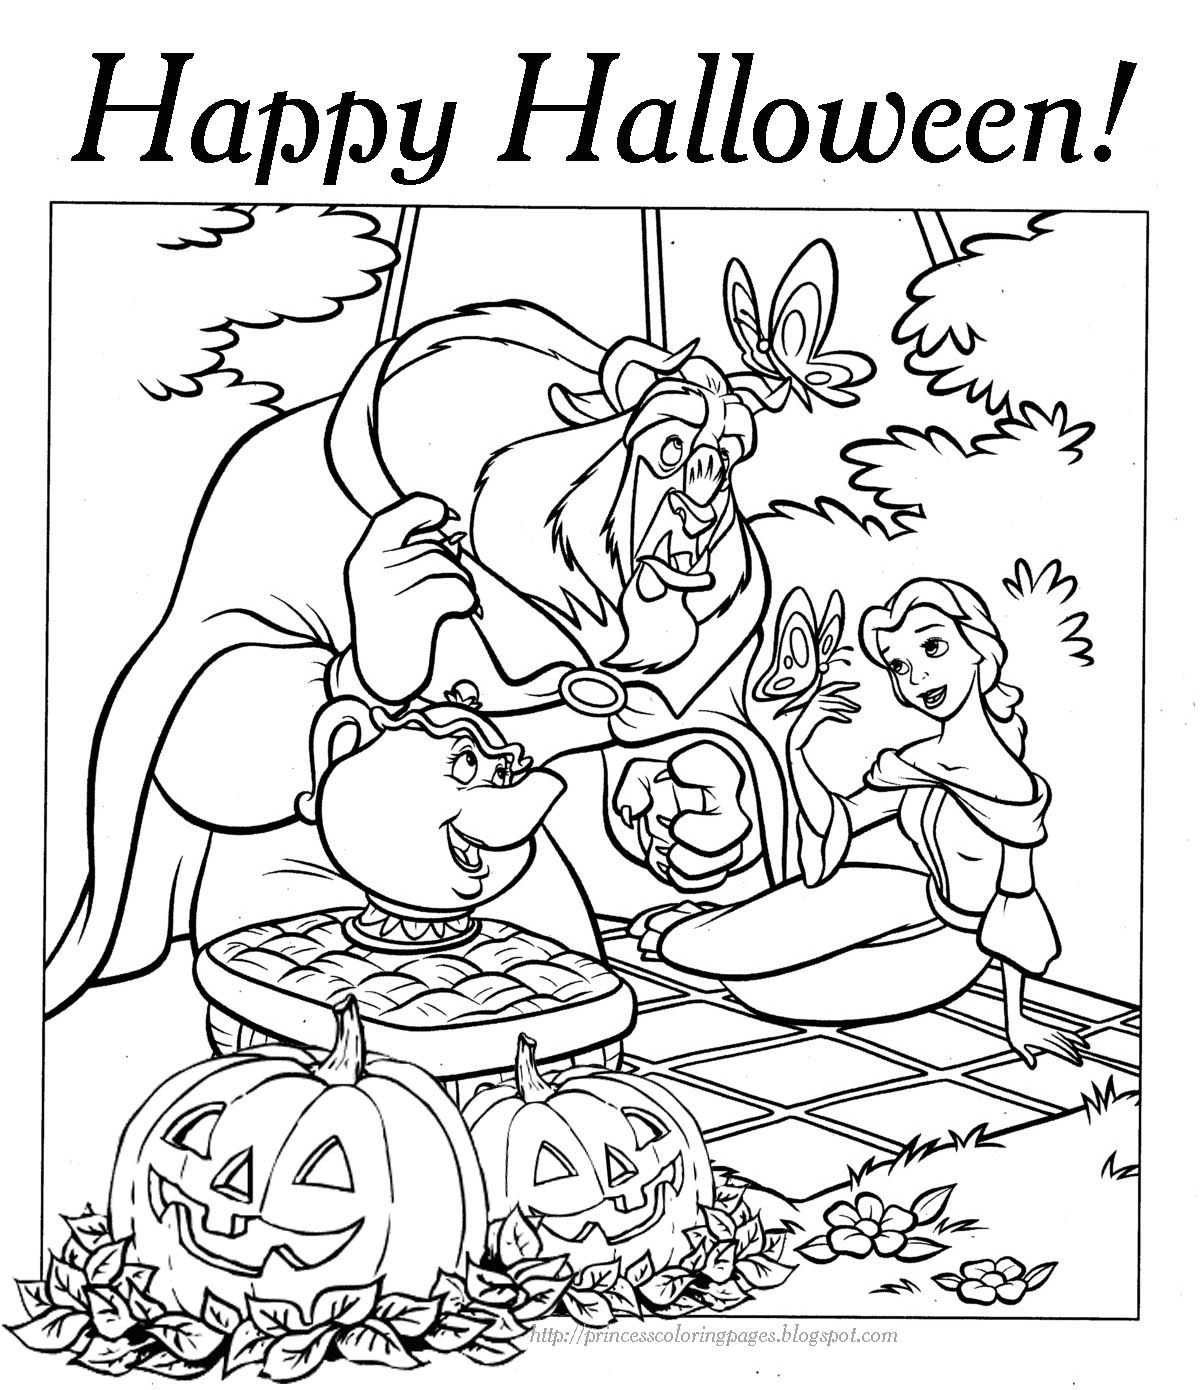 6 Pics Of Disney Halloween Coloring Pages Hard - Free Disney